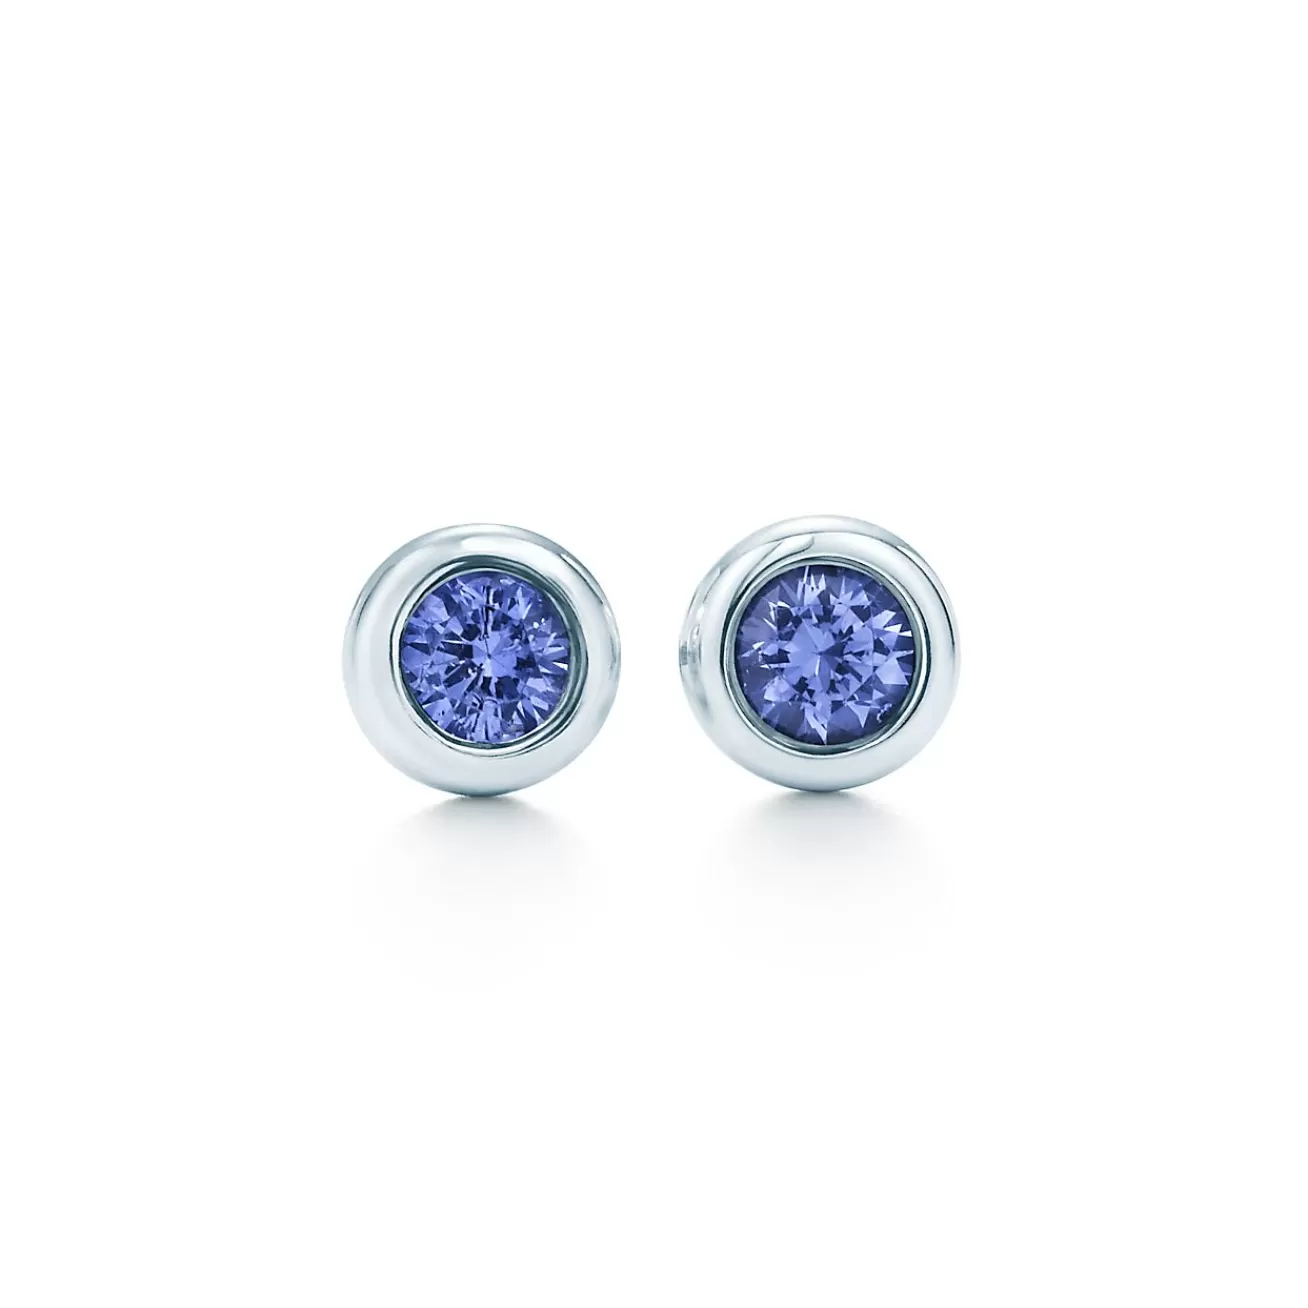 Tiffany & Co. Elsa Peretti® Color by the Yard earrings in sterling silver with tanzanites. | ^ Earrings | Sterling Silver Jewelry